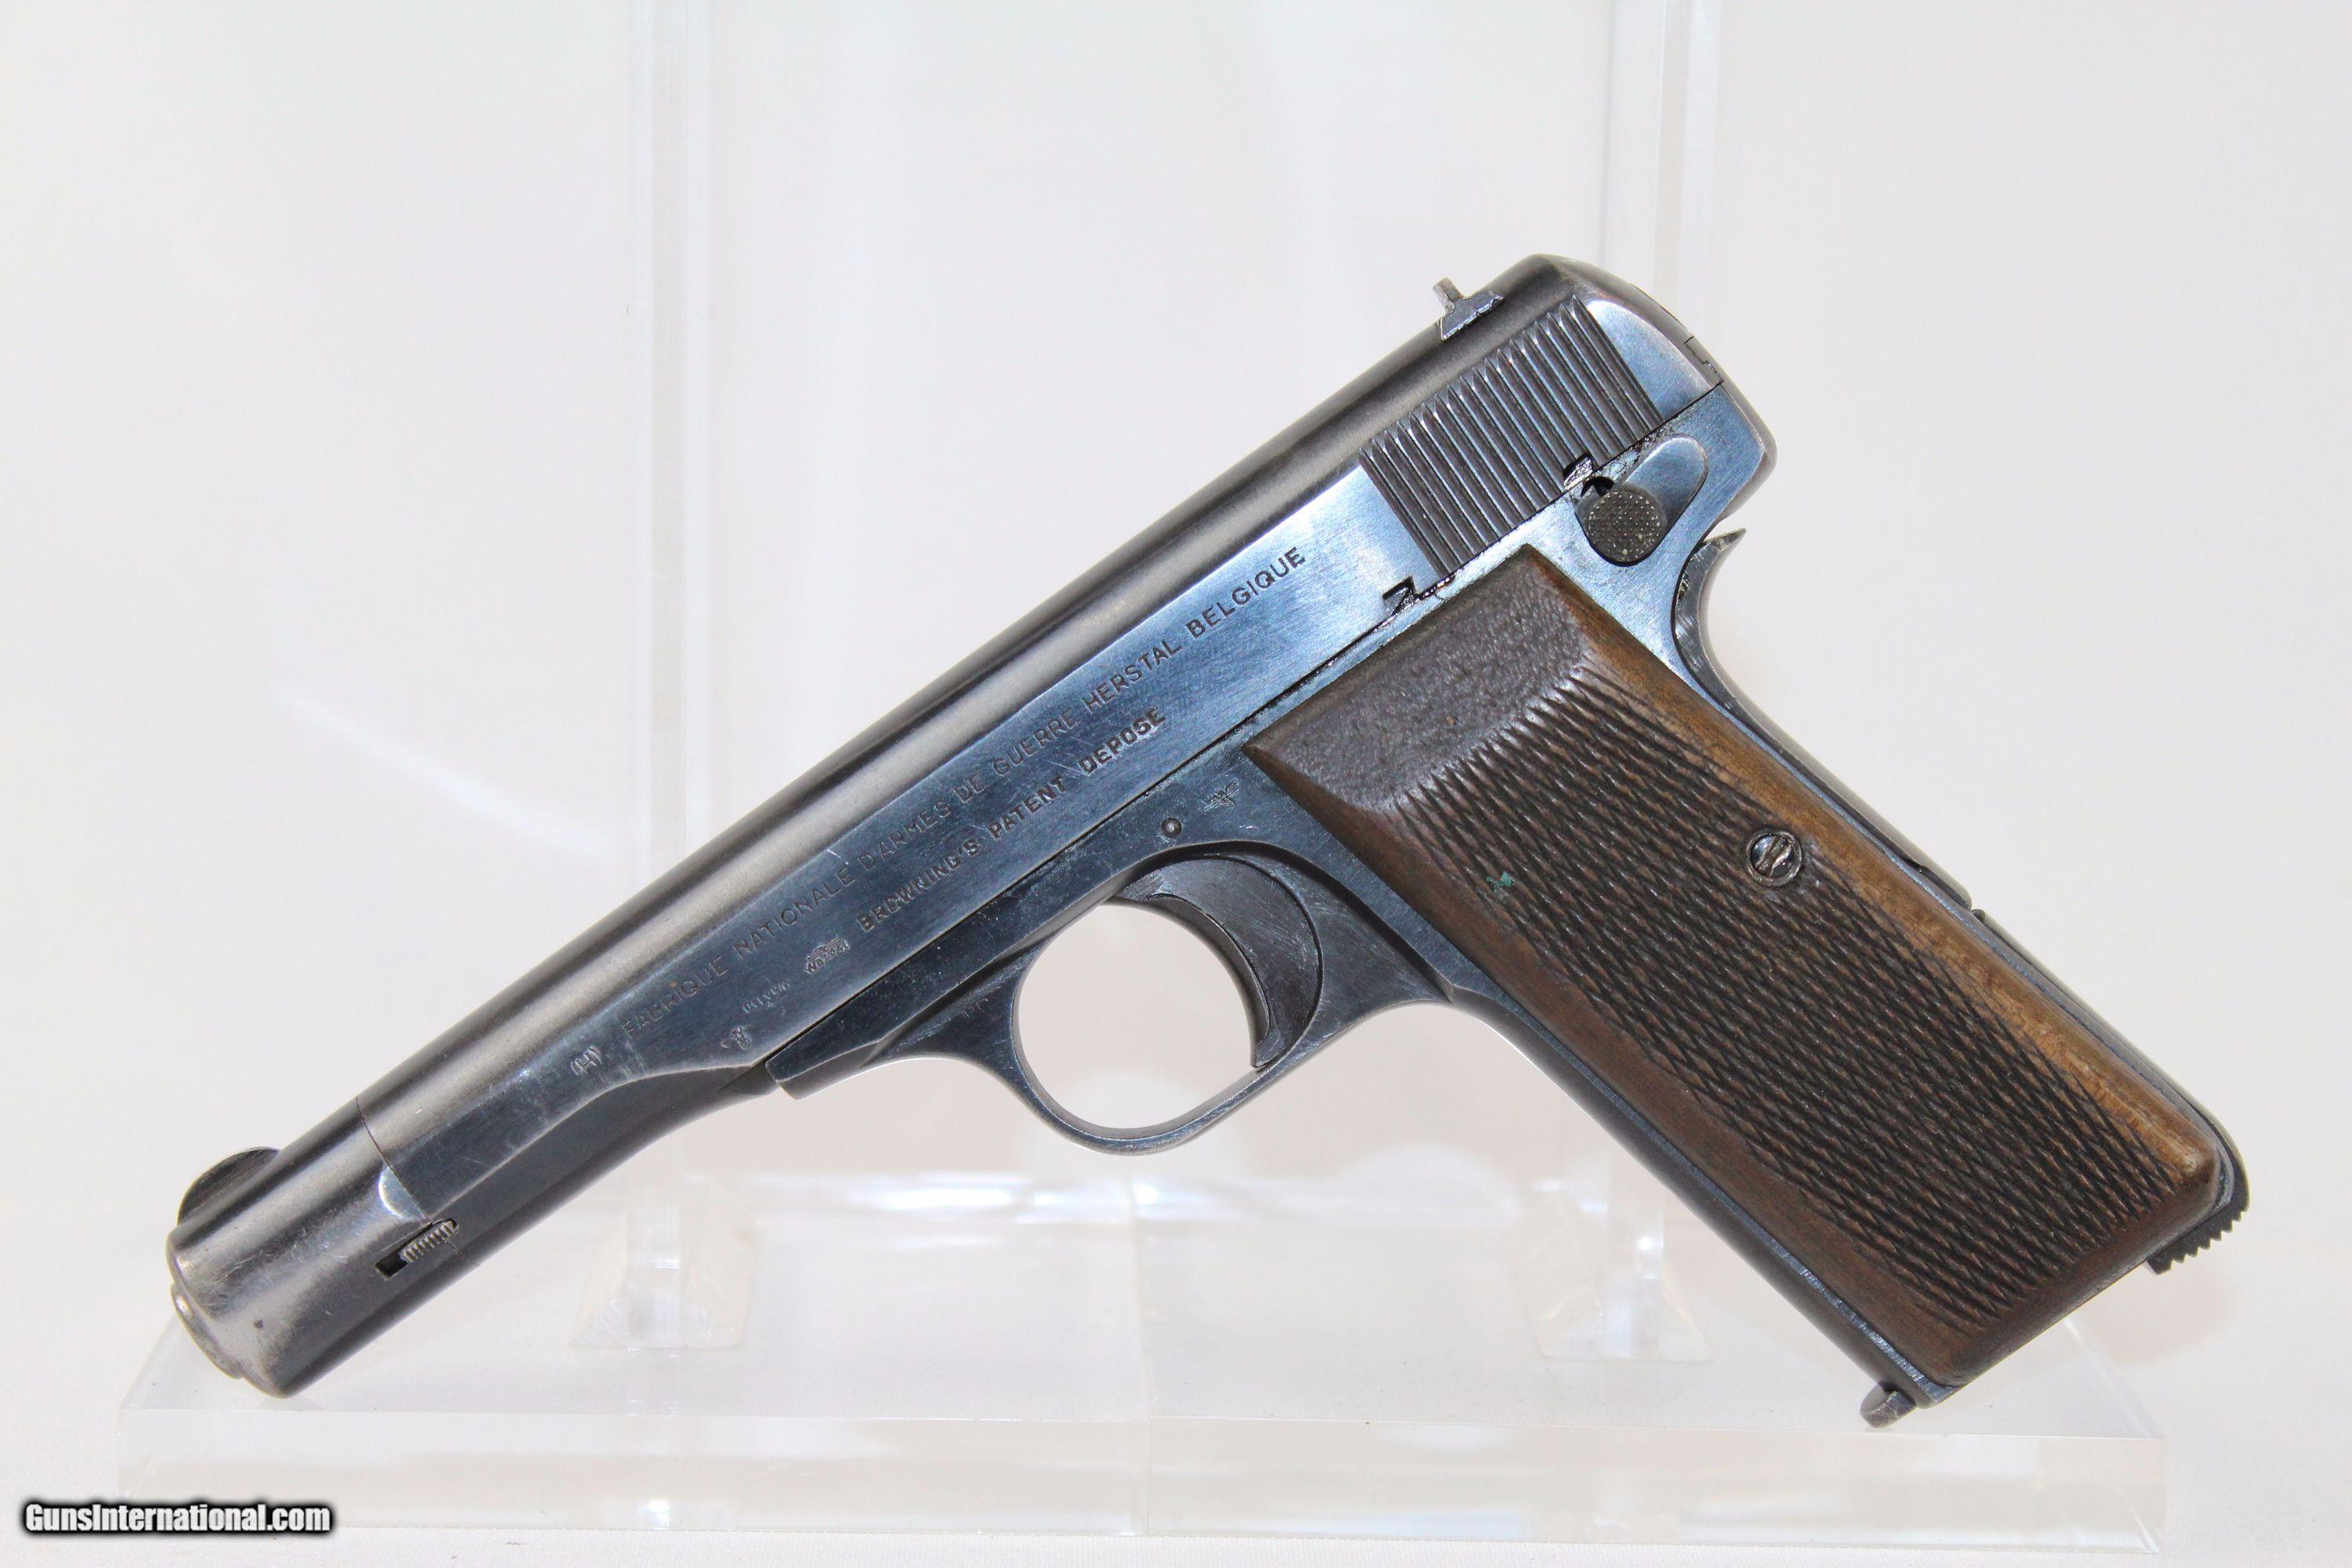 Fn browning pistols, side arms that shaped the world history: expanded second edition